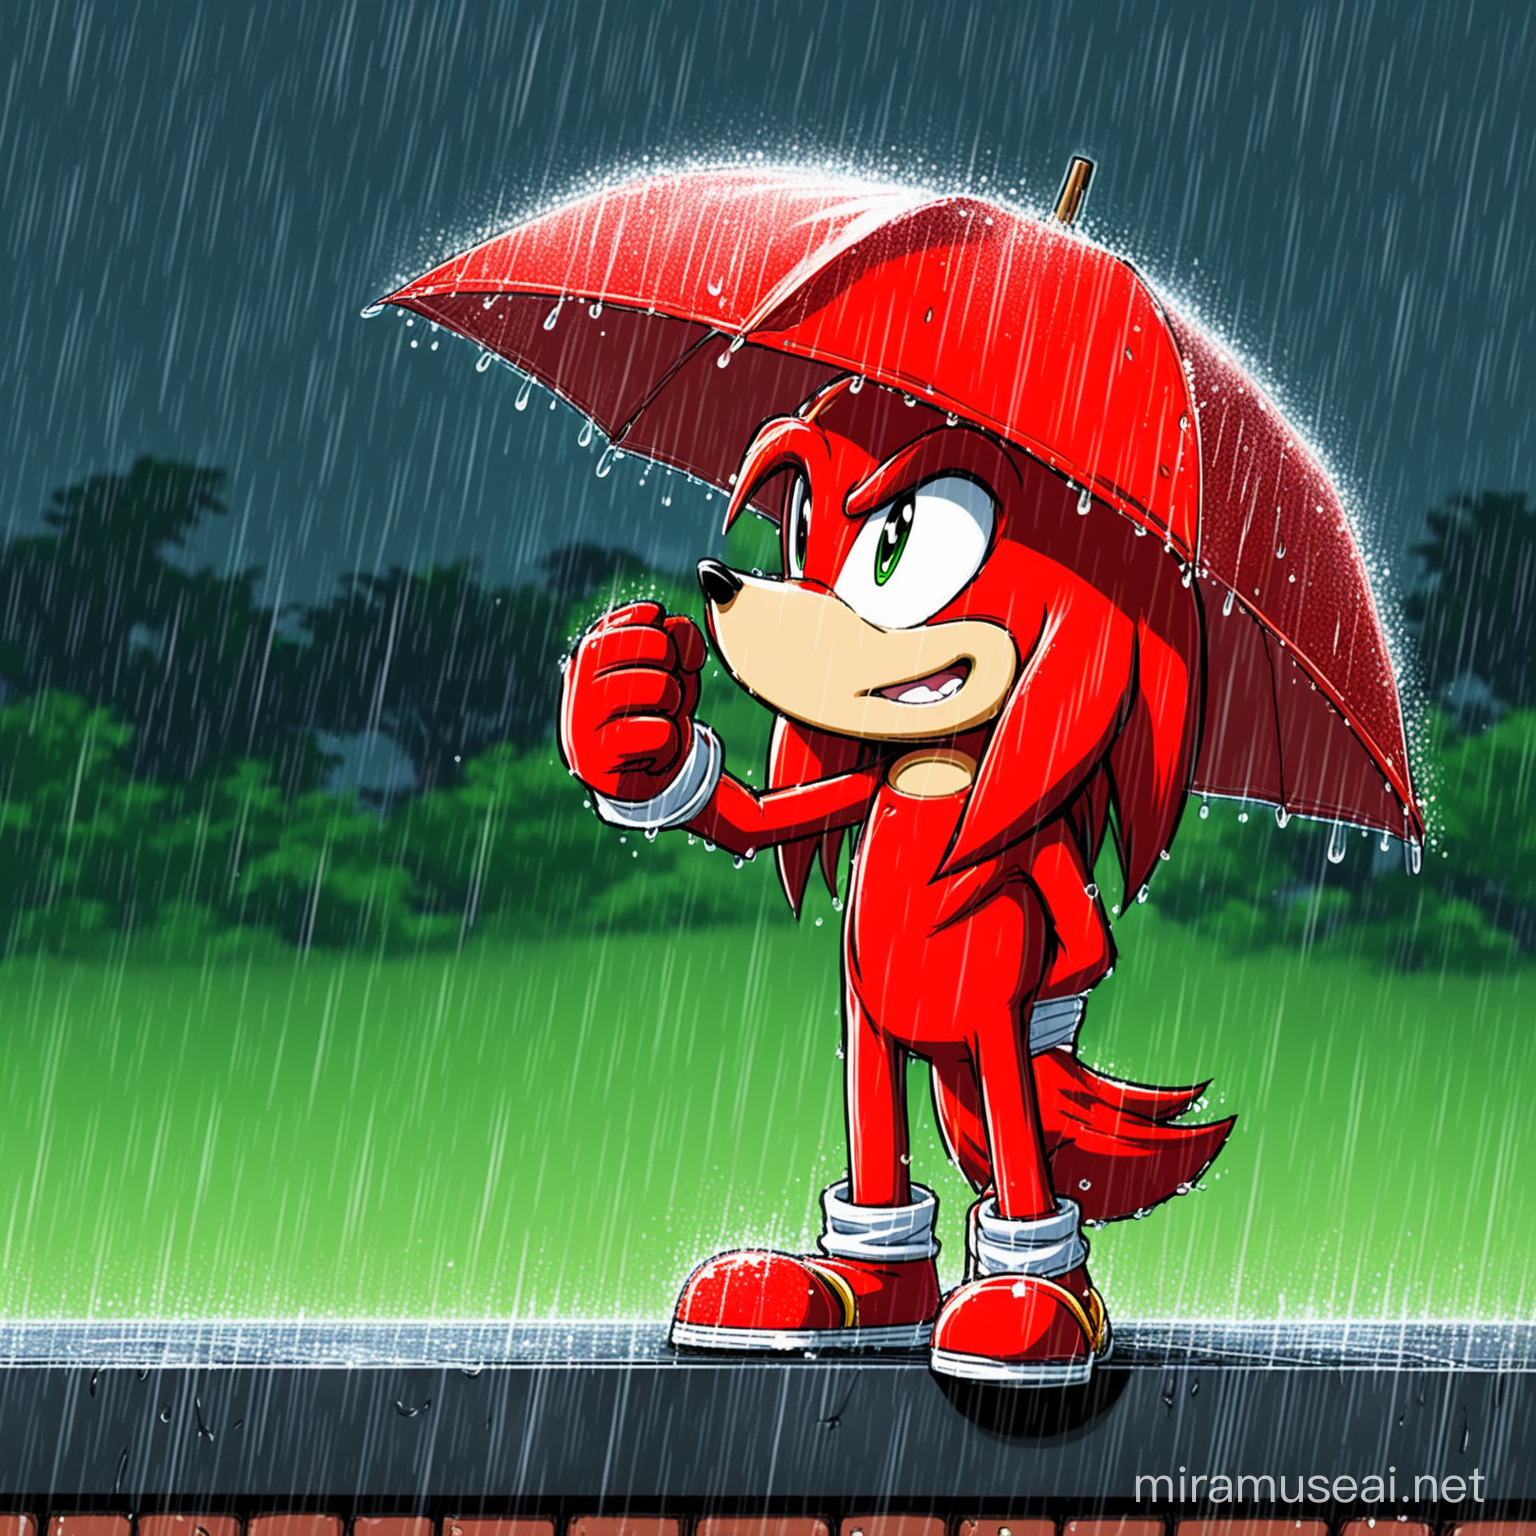 Knuckles Relaxes Under the Soothing Rain